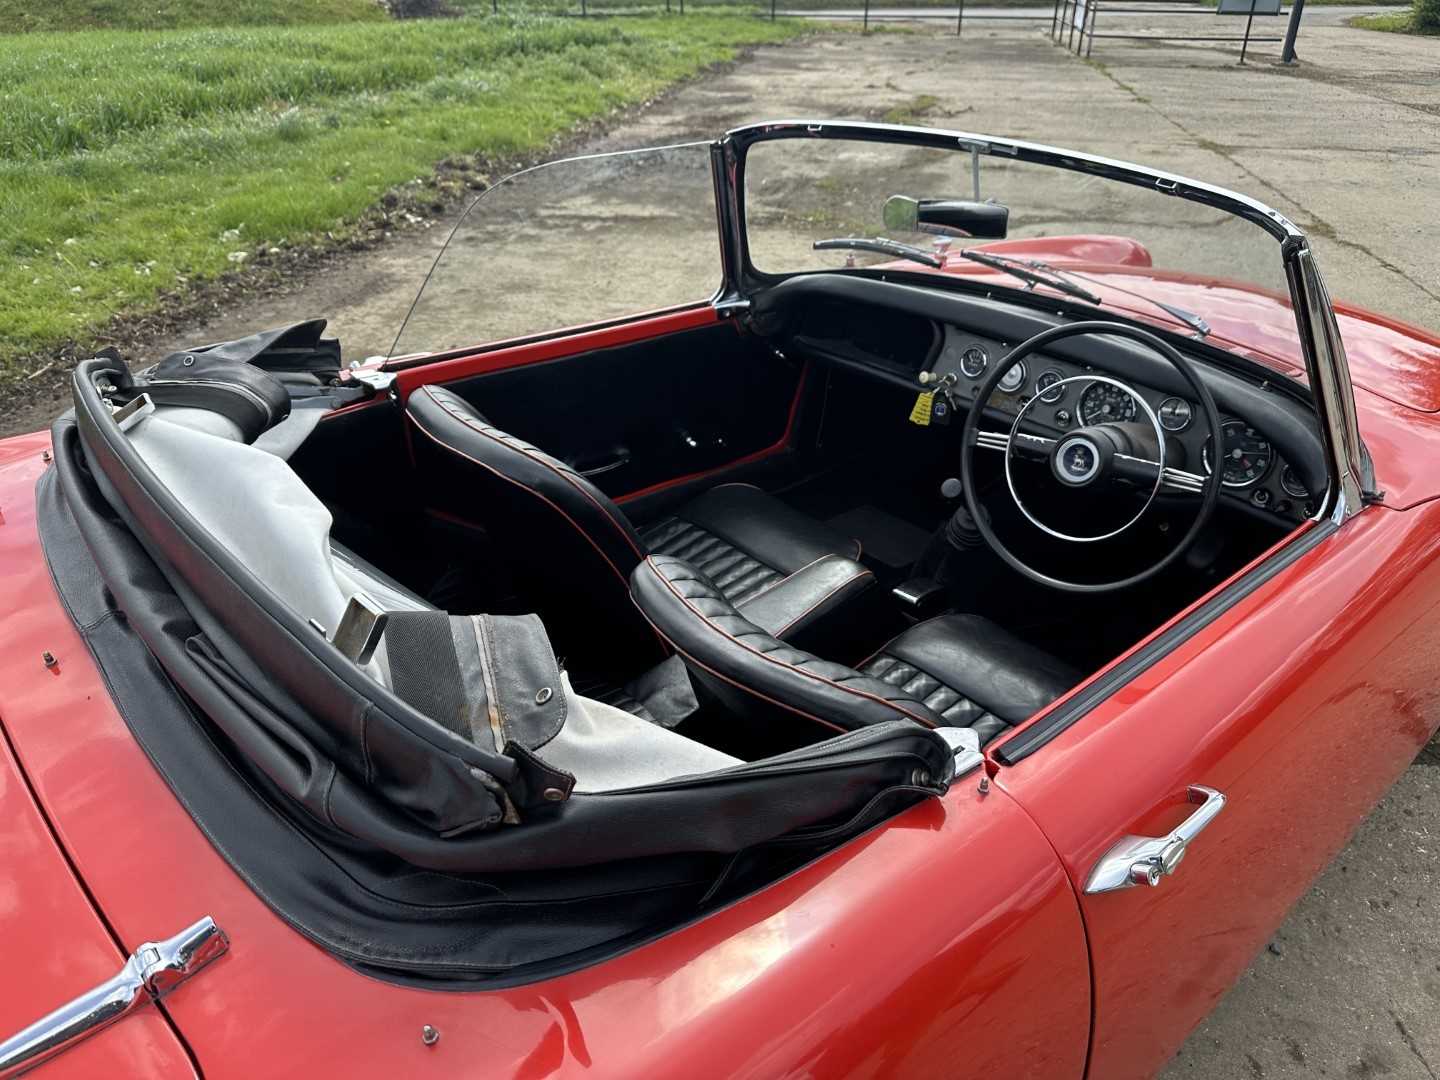 1960 Sunbeam Alpine sports convertible, 1600cc engine, manual gearbox with overdrive, reg. no. 3685 - Image 7 of 30